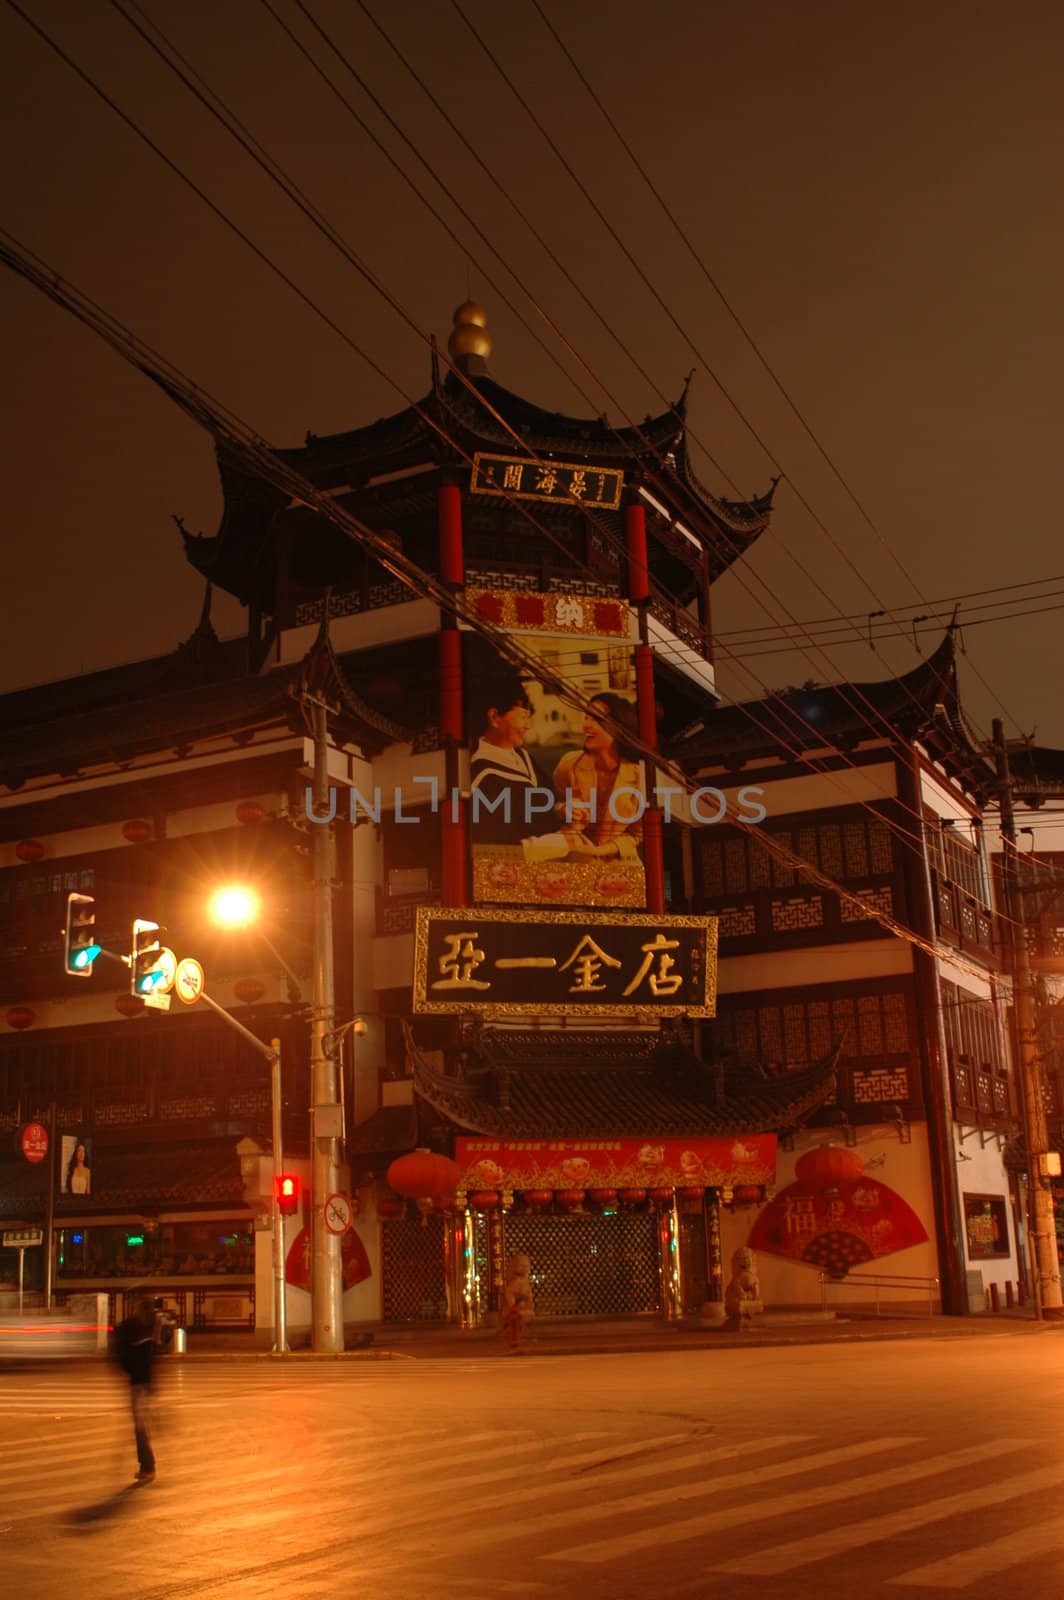 YuYuan - old town in Shanghai with traditional architecture, wooden houses and pagodas.